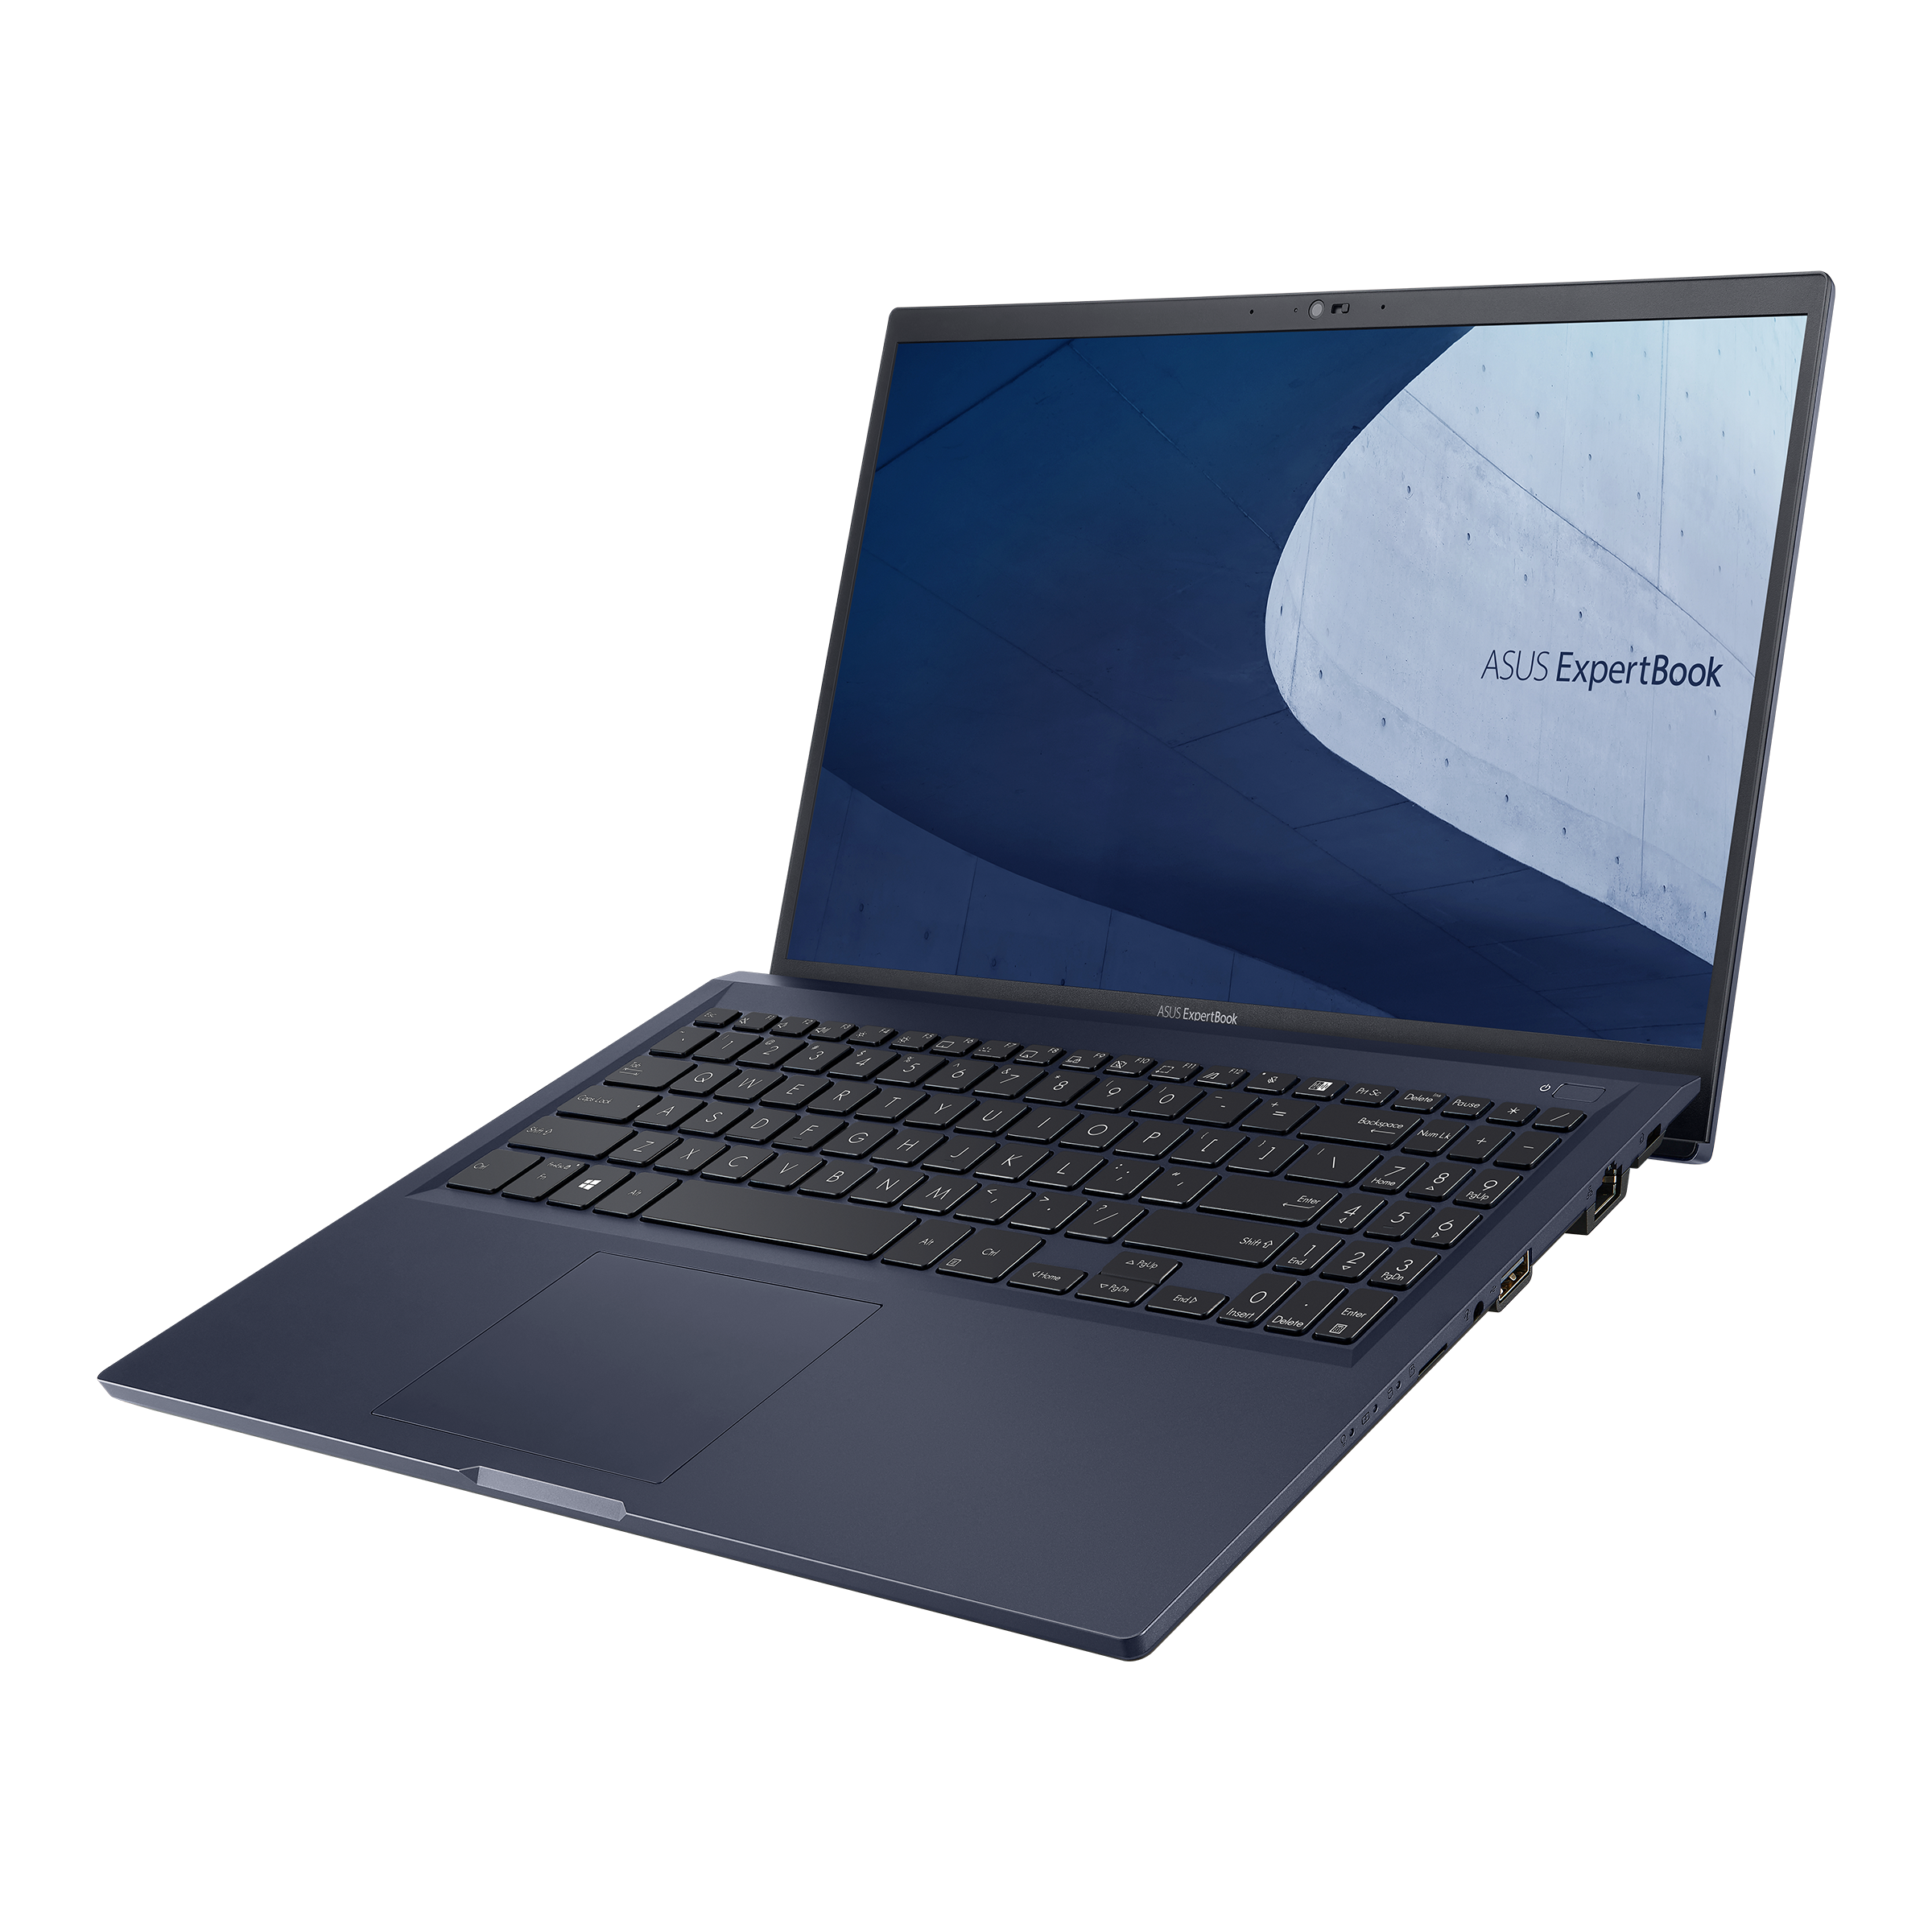 ExpertBook B1 B1500｜Laptops For Work｜ASUS USA